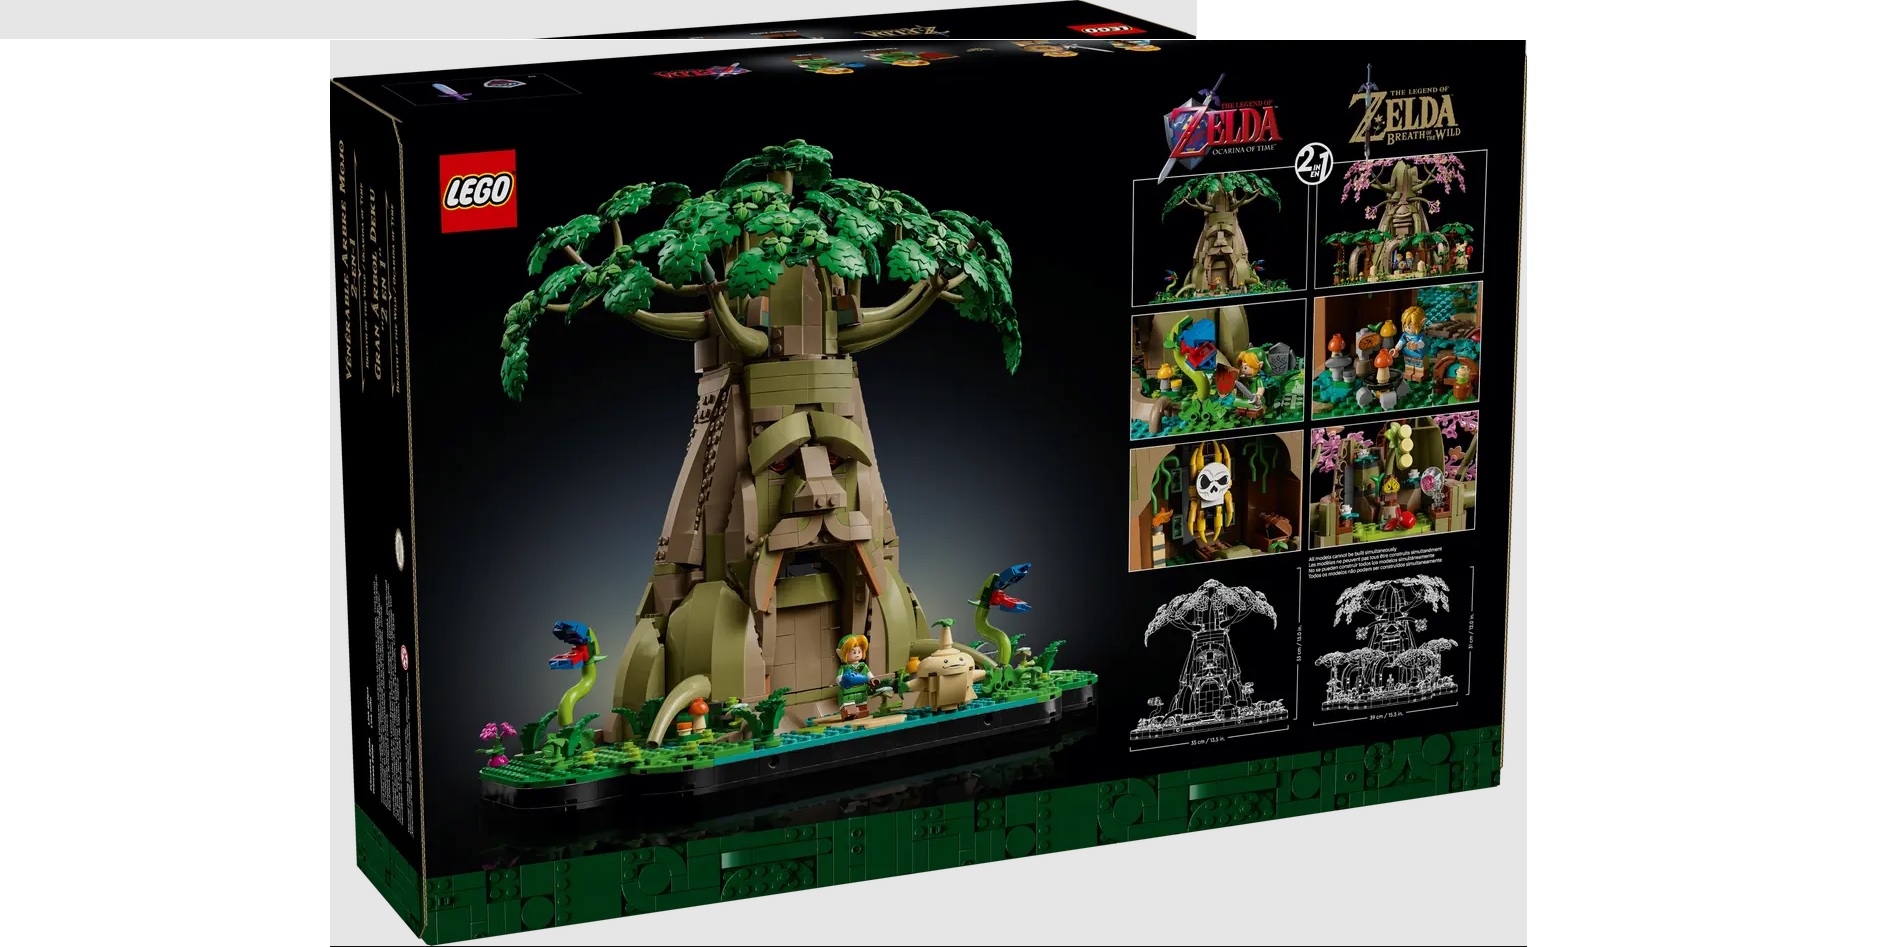 LEGO Deku Tree is a 2-in-1 set honoring two different Zelda games